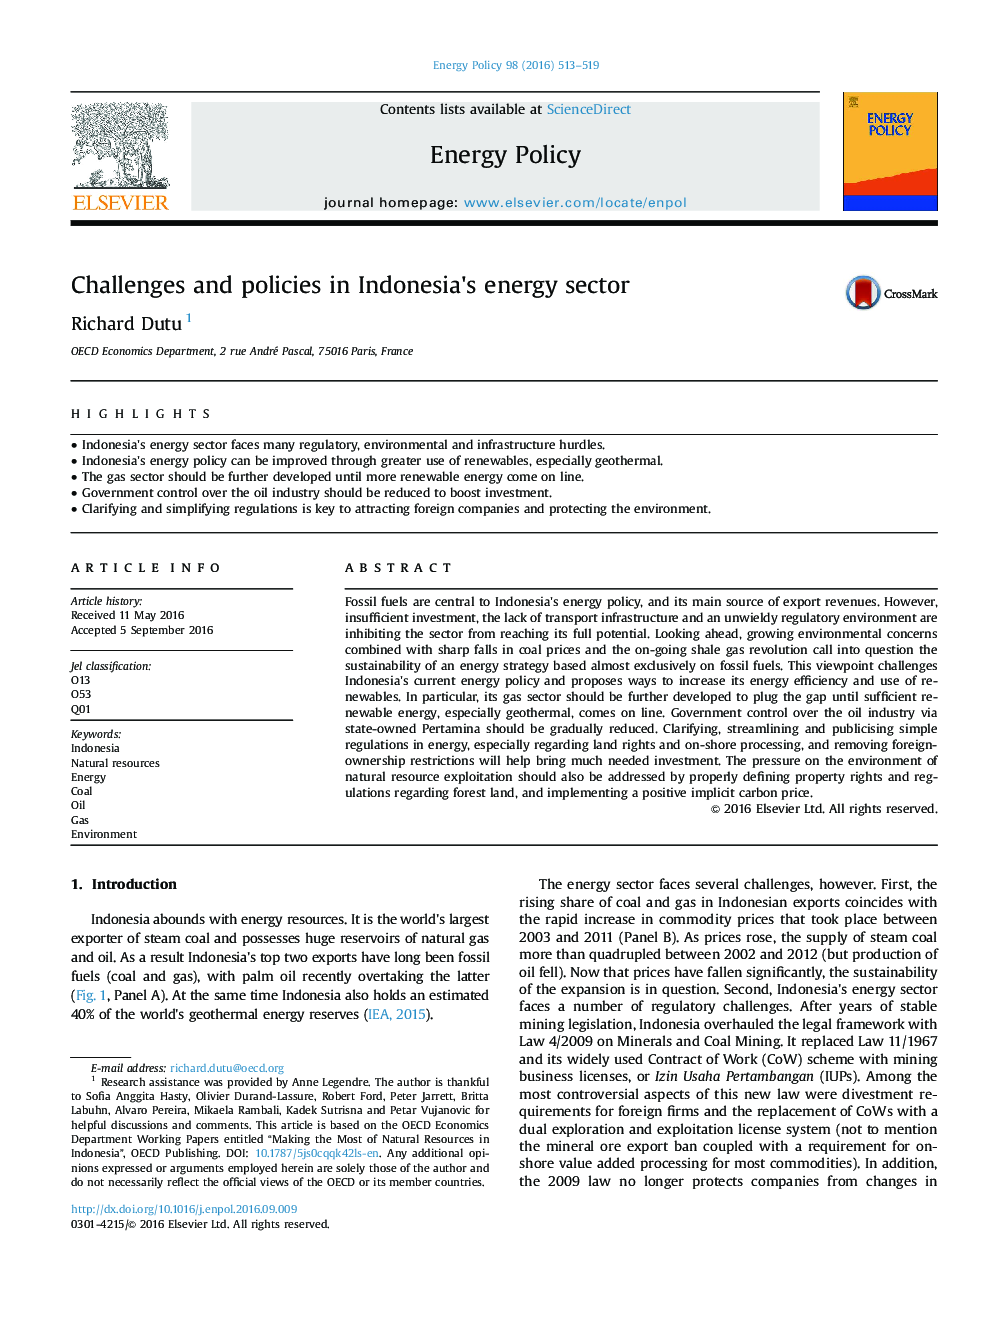 Challenges and policies in Indonesia's energy sector